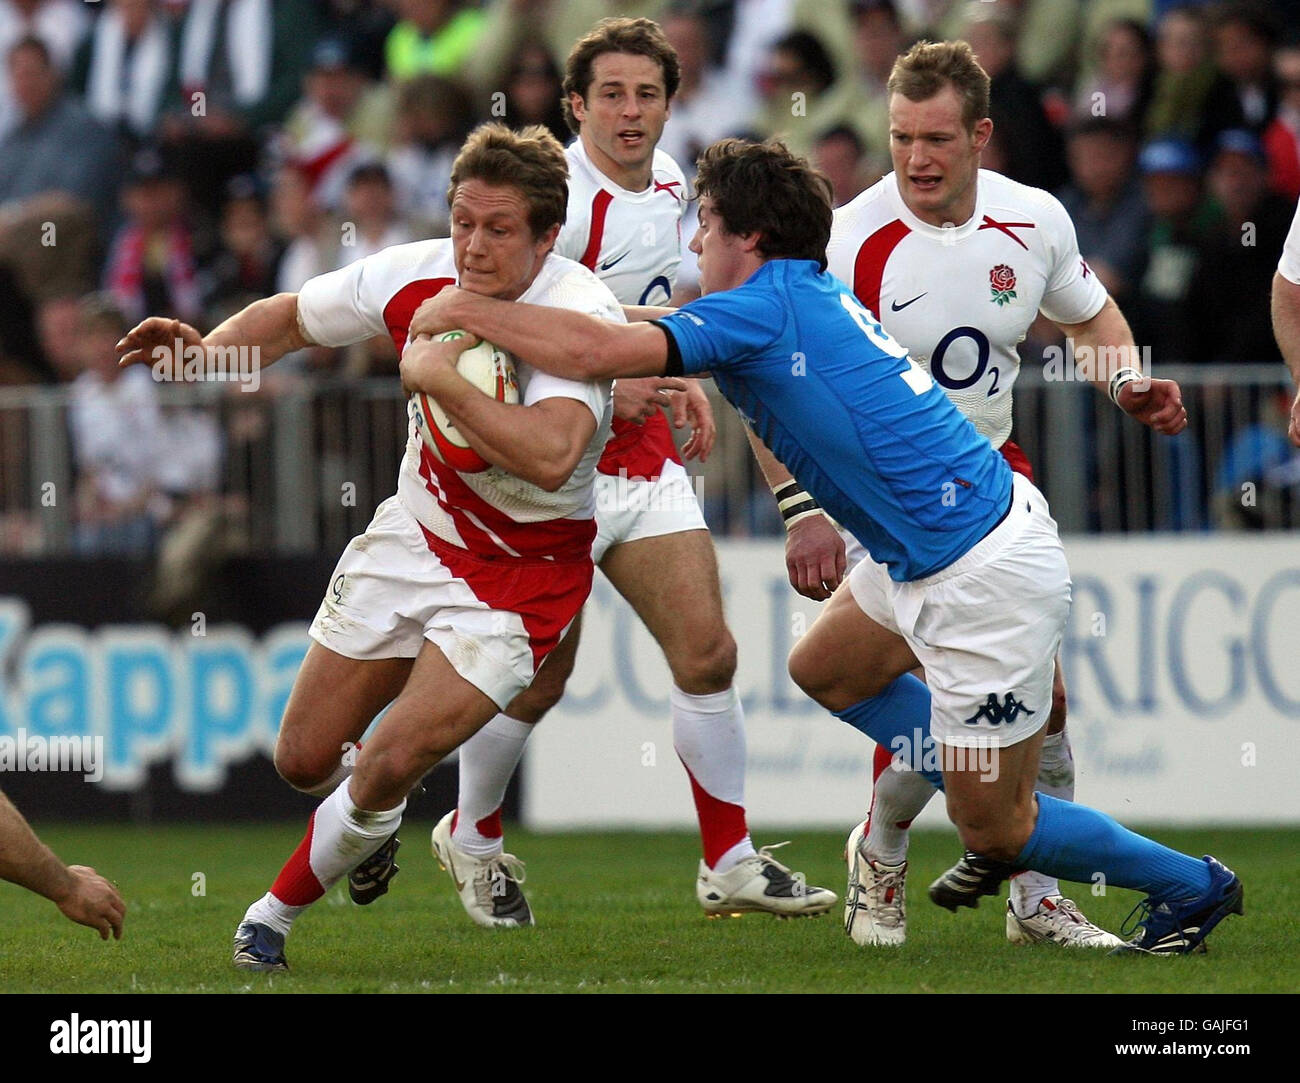 Rugby Union - RBS 6 Nations Championship 2008 - Italy v England - Stadio Flaminio. England's Jonny Wilkinson is tackled by Italy's Pietro Travagli during the RBS 6 Nations match at Stadio Flaminio, Rome, Italy. Stock Photo